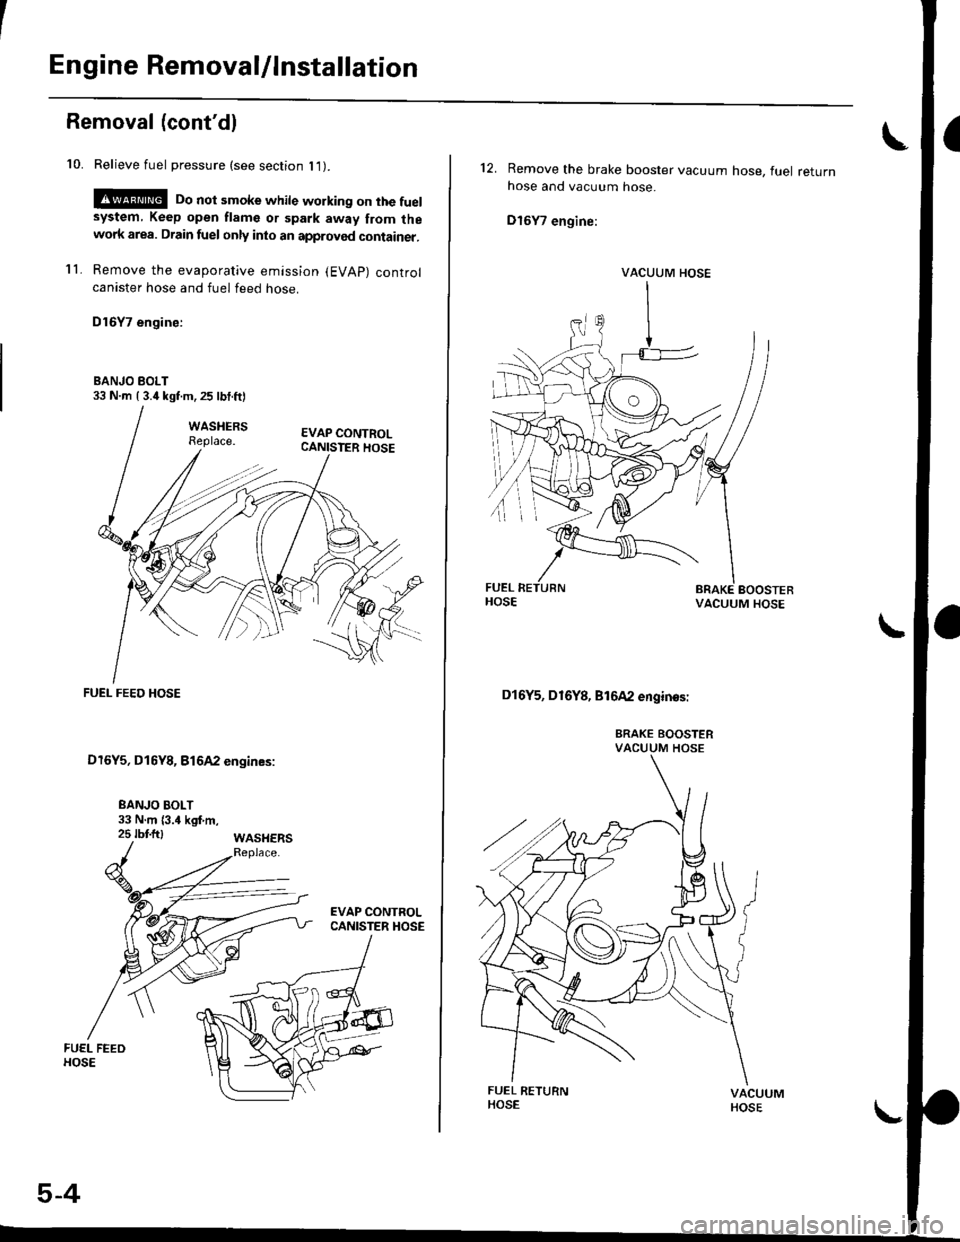 HONDA CIVIC 1999 6.G Service Manual Engine Removal/lnstallation
Removal (contdl
10. Relieve fuel pressure (see section l1).
!@ Do not smoke while working on the fuelsystem, Keep open flame or spark away from thewolk area. Drain fuel on